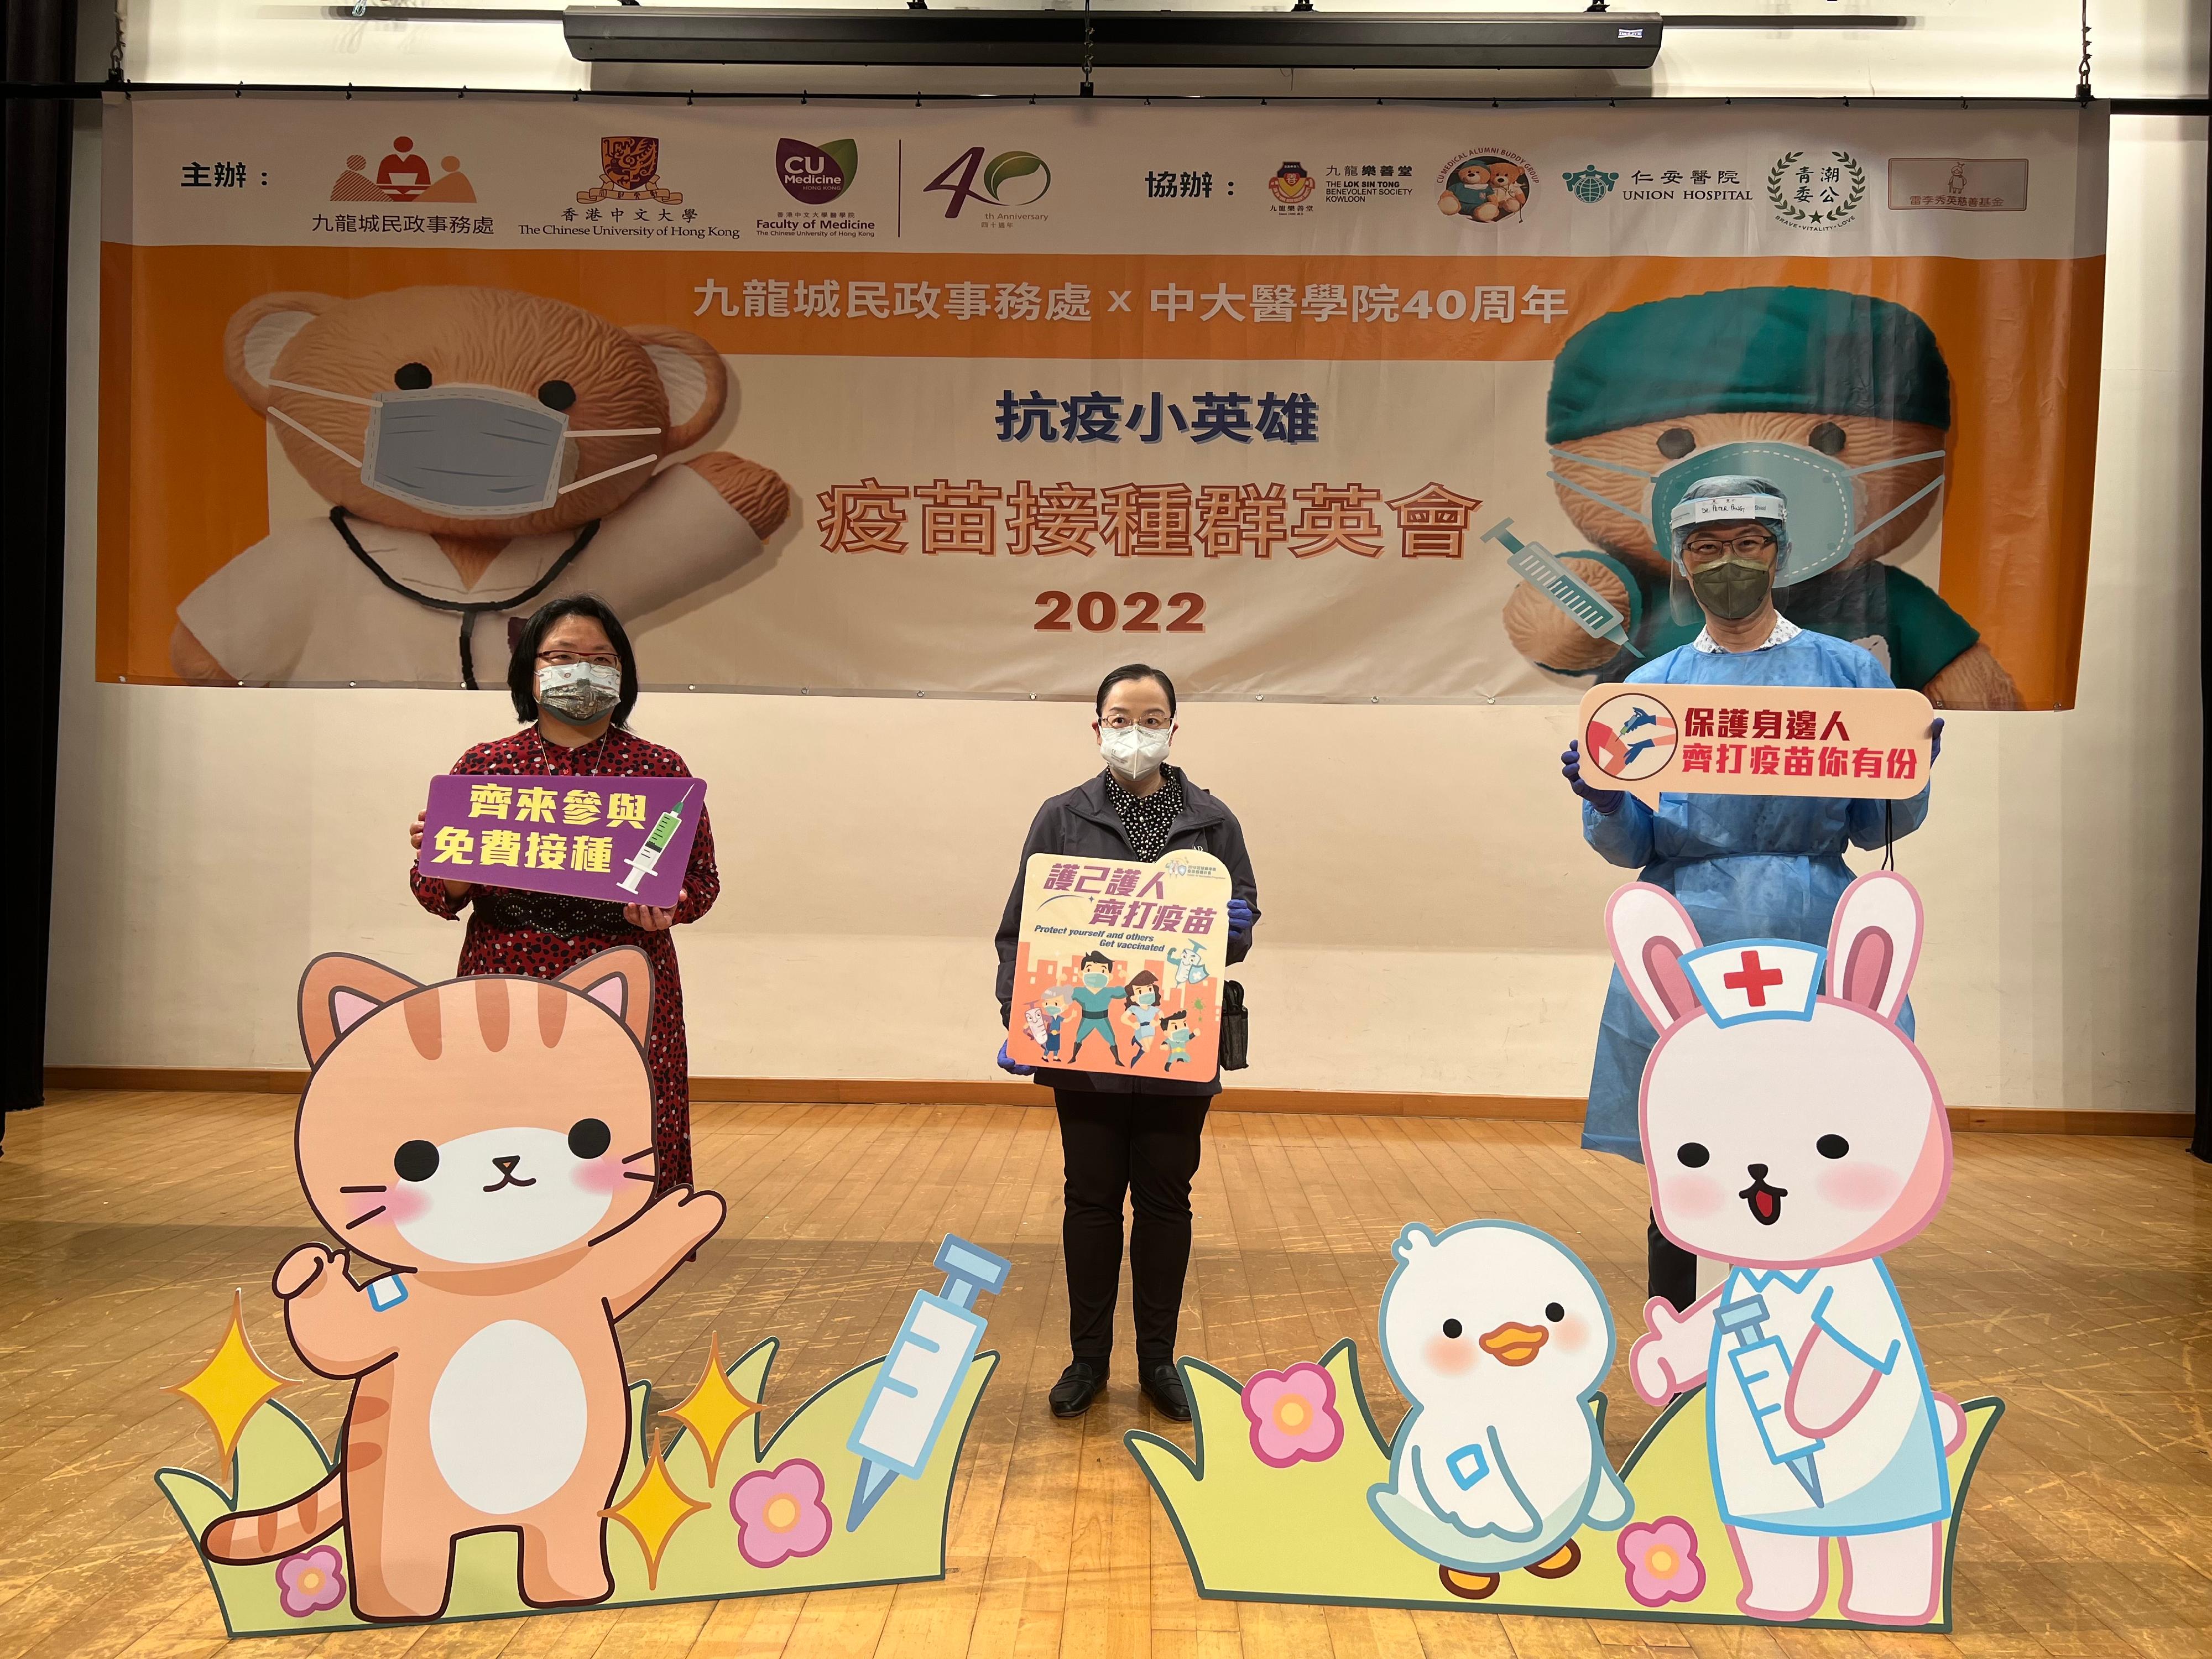 Acting Director of Home Affairs, Miss Vega Wong, officiated at the presentation ceremony of a community vaccination event for children known as "I am the Little Anti-pandemic Hero" organised by the Kowloon City District Office held at the Hung Hom Community Hall today (March 6). Picture shows Miss Wong (centre), the District Officer (Kowloon City), Miss Alice Choi (left), and the Chairman of the Lok Sin Tong Benevolent Society Kowloon, Dr Peter Pang (right), at the presentation ceremony.